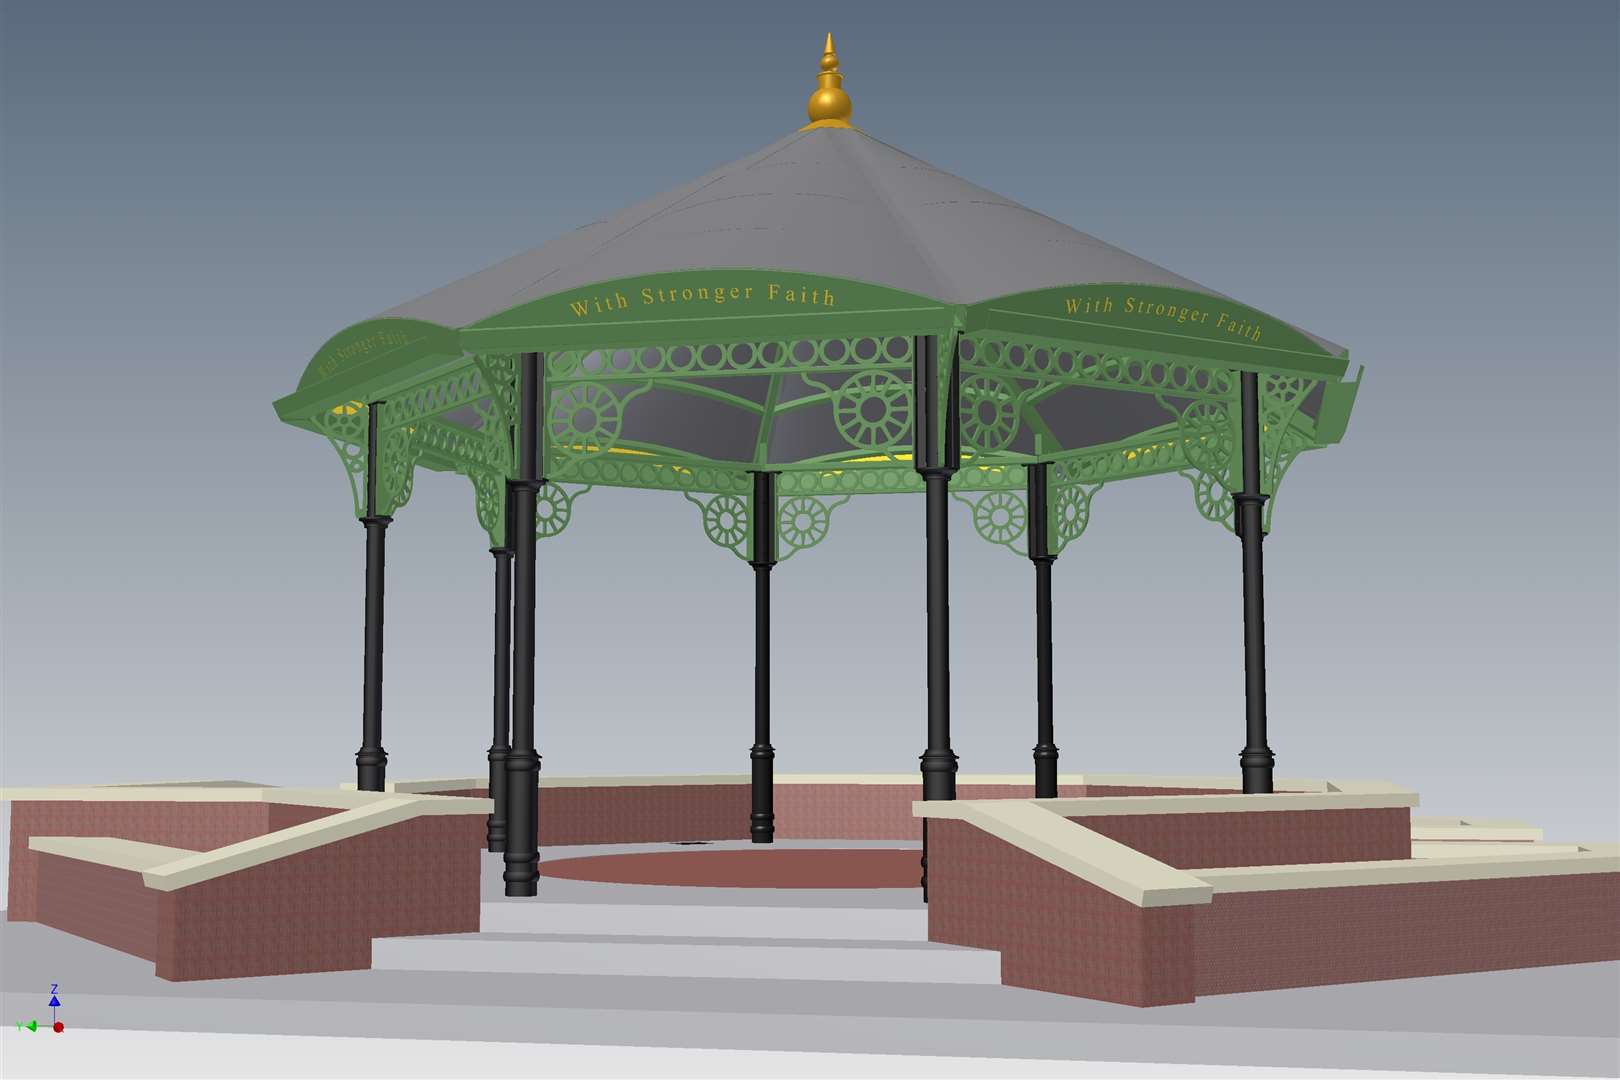 An artist's impression of the new canopy covering the Ashford High Street bandstand